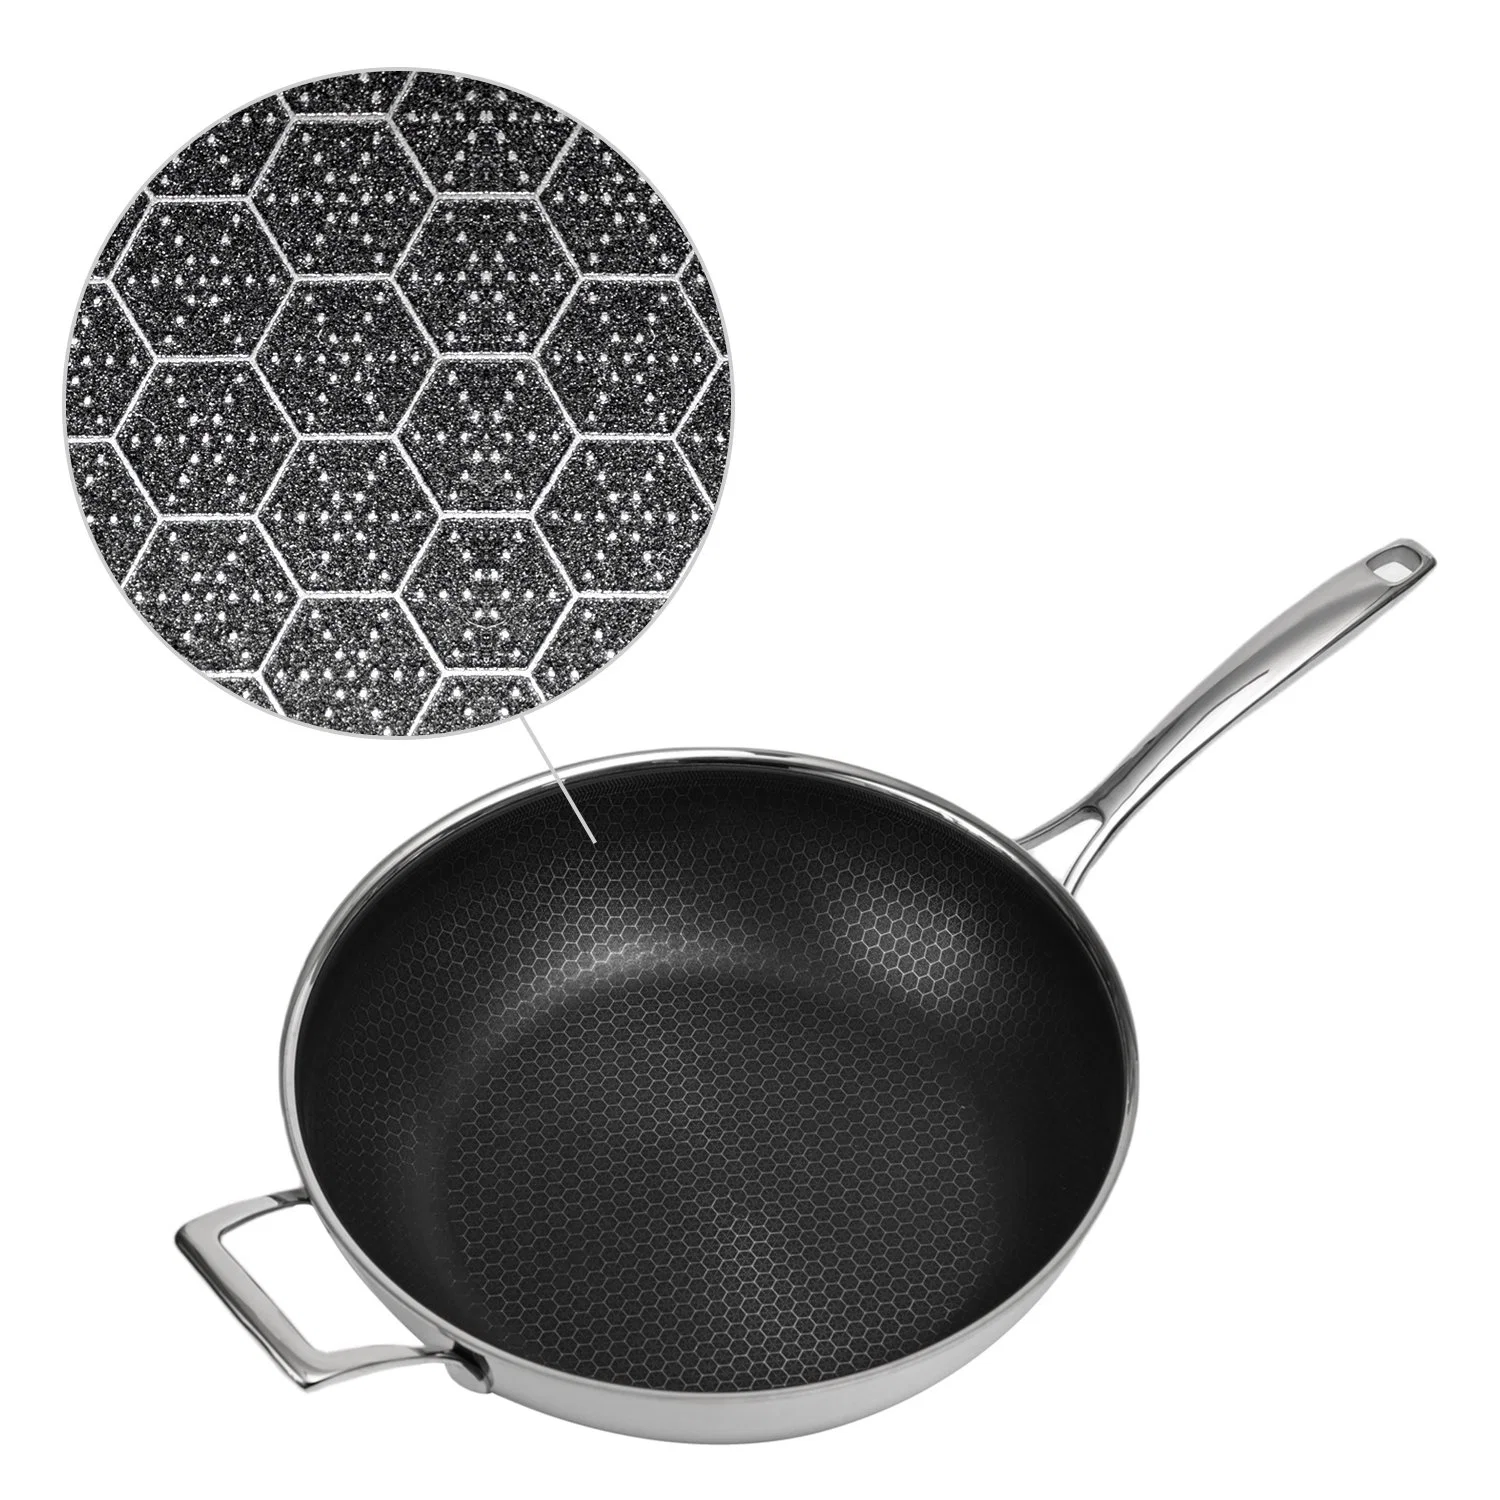 Hot Sales Stainless Steel Cookware Non-Stick Double Layer Honey Comb Coating 30cm Wok